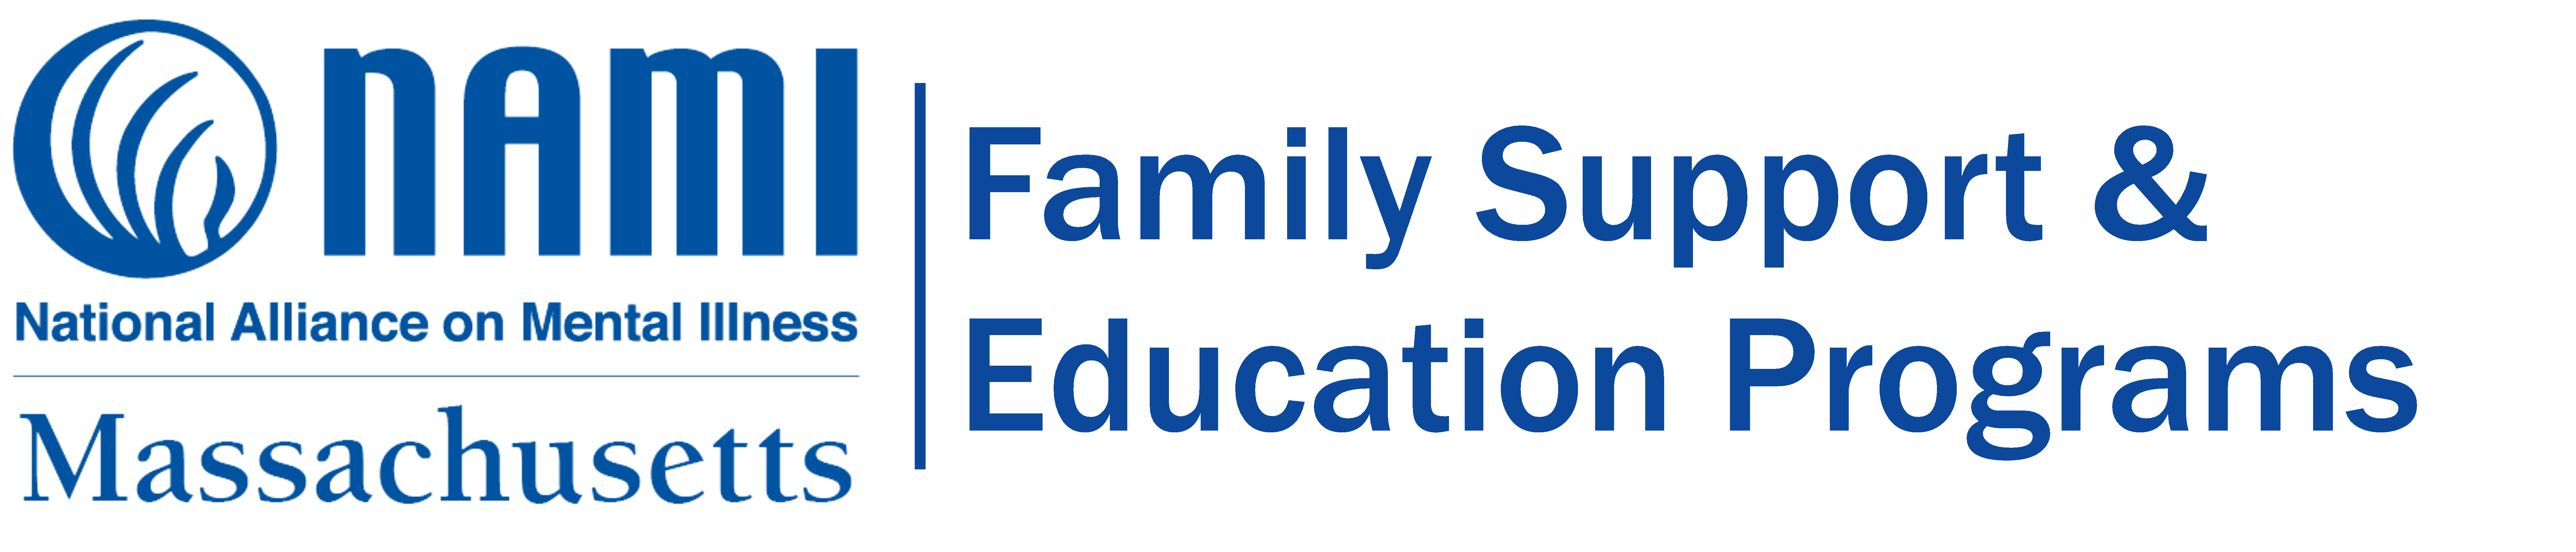 Family Support & Education Programs